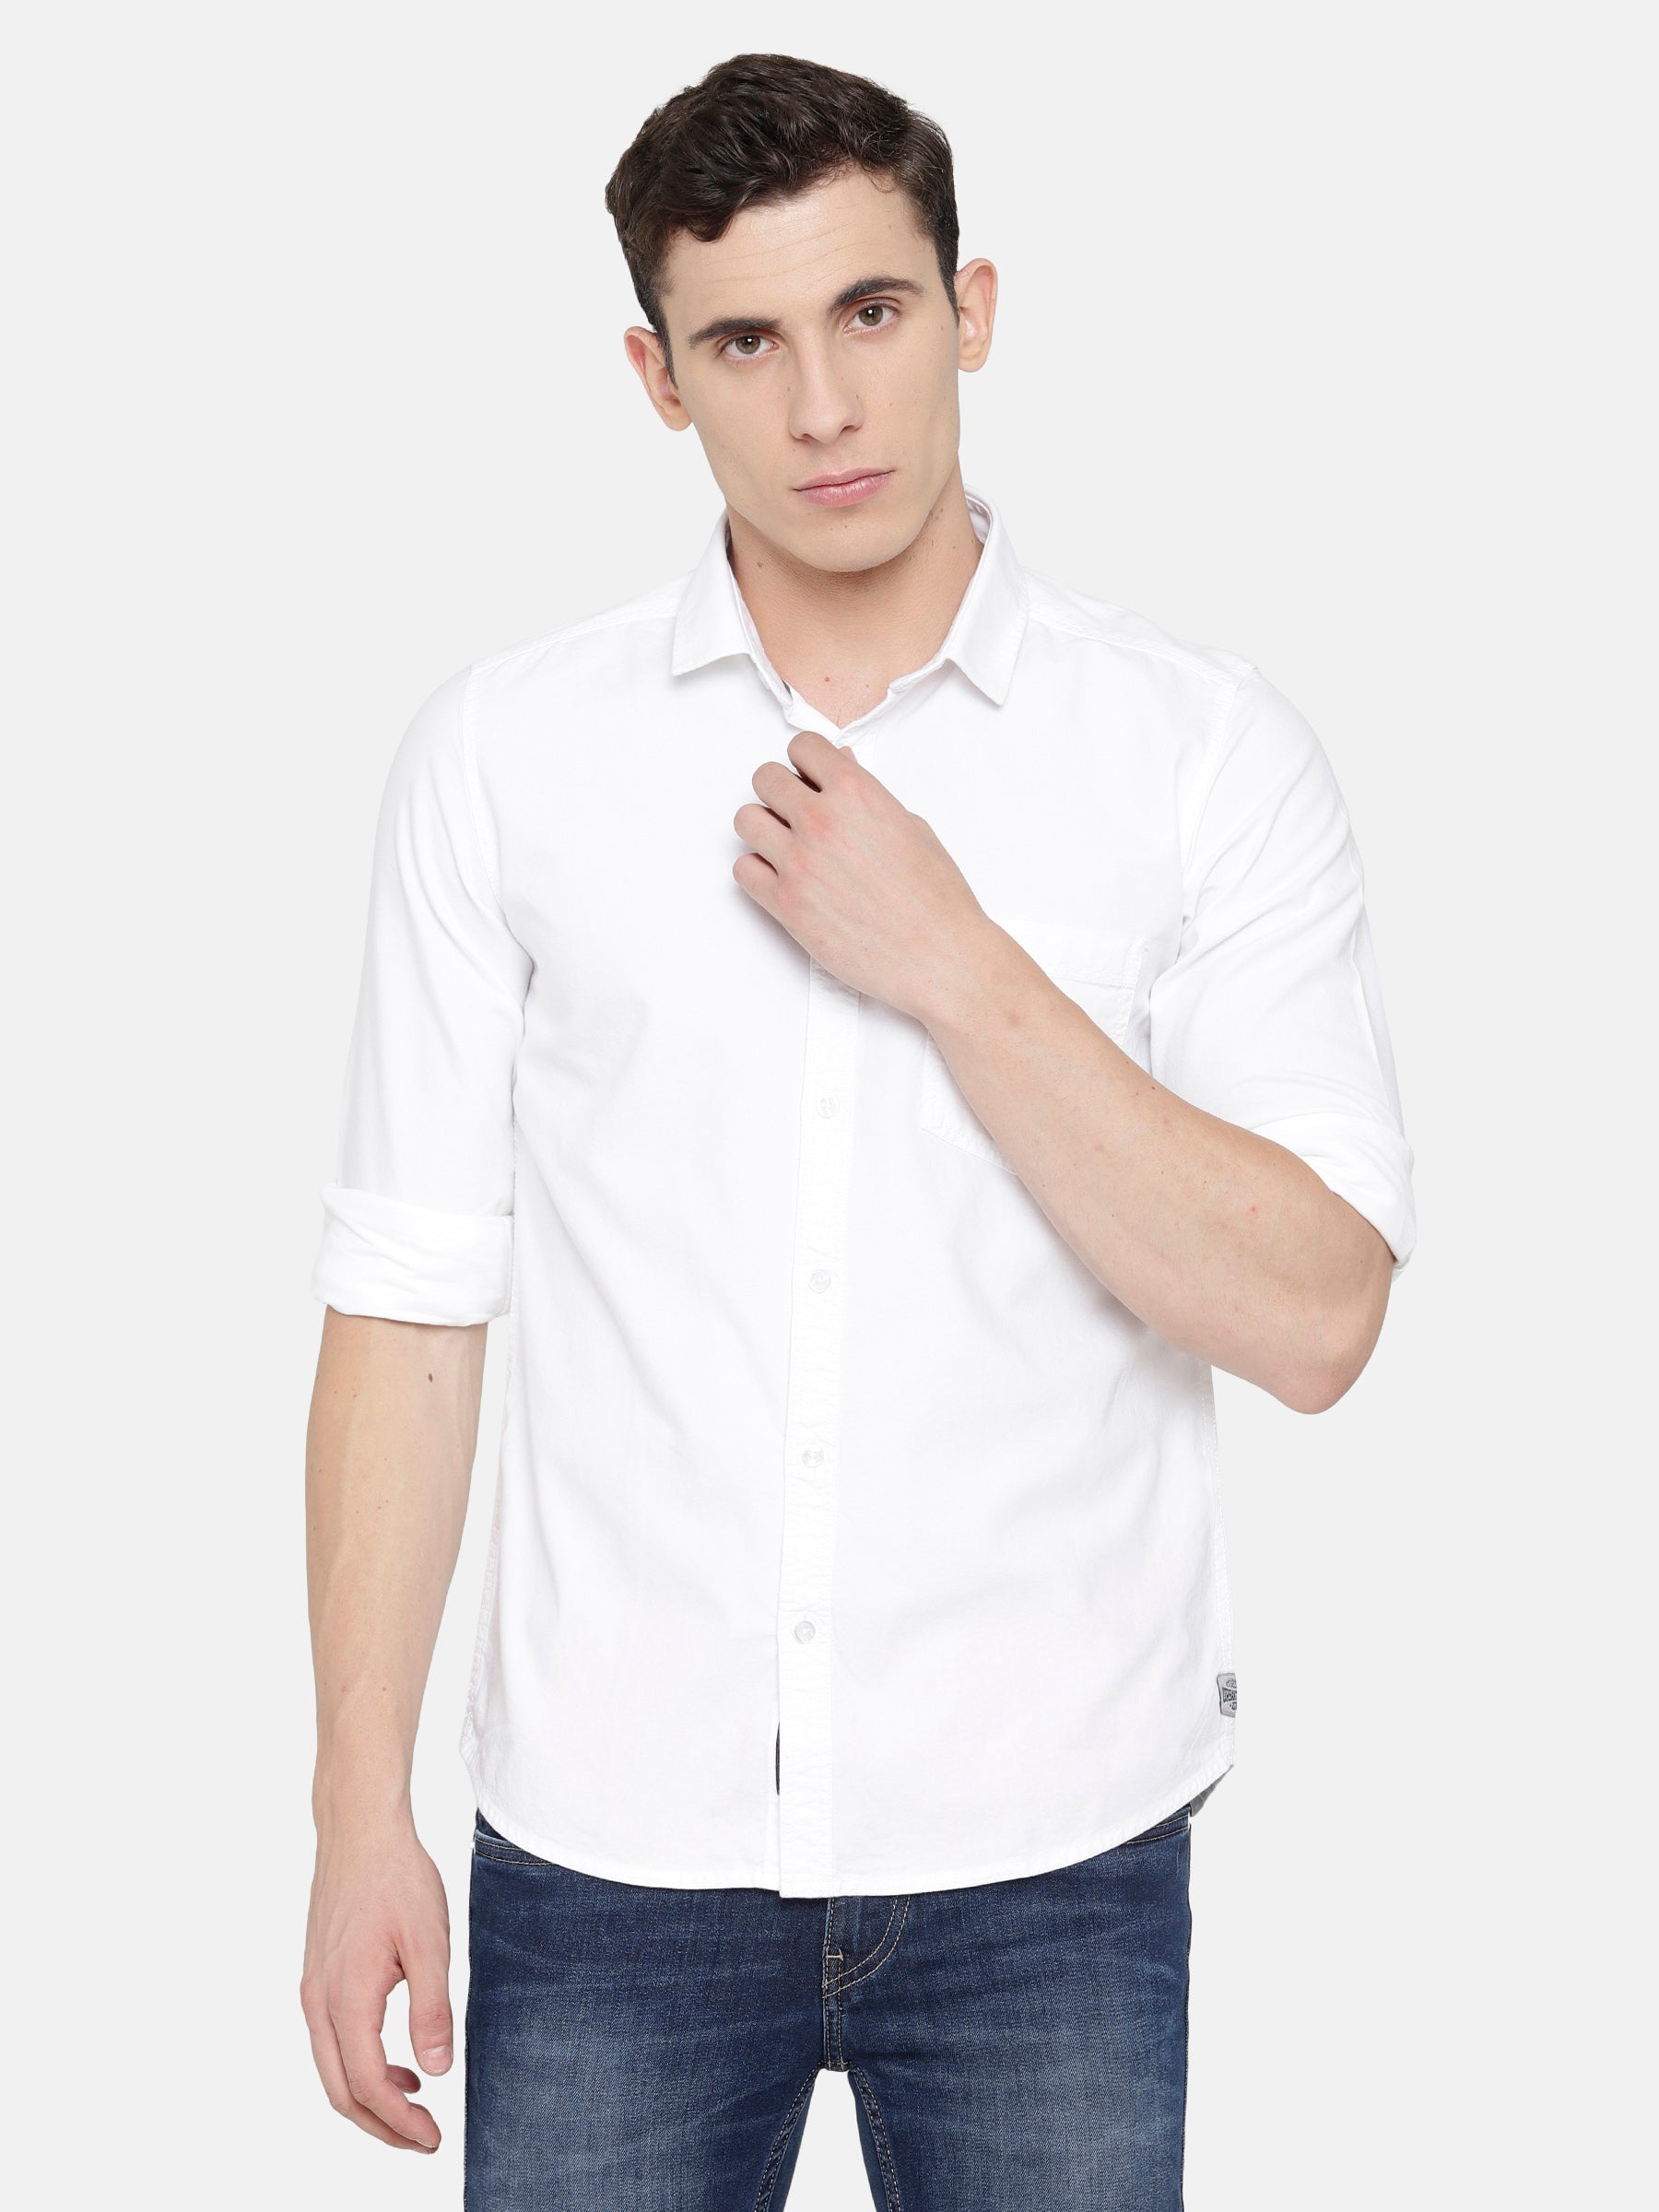 Classic solid white Oxford shirt with cut away collar.